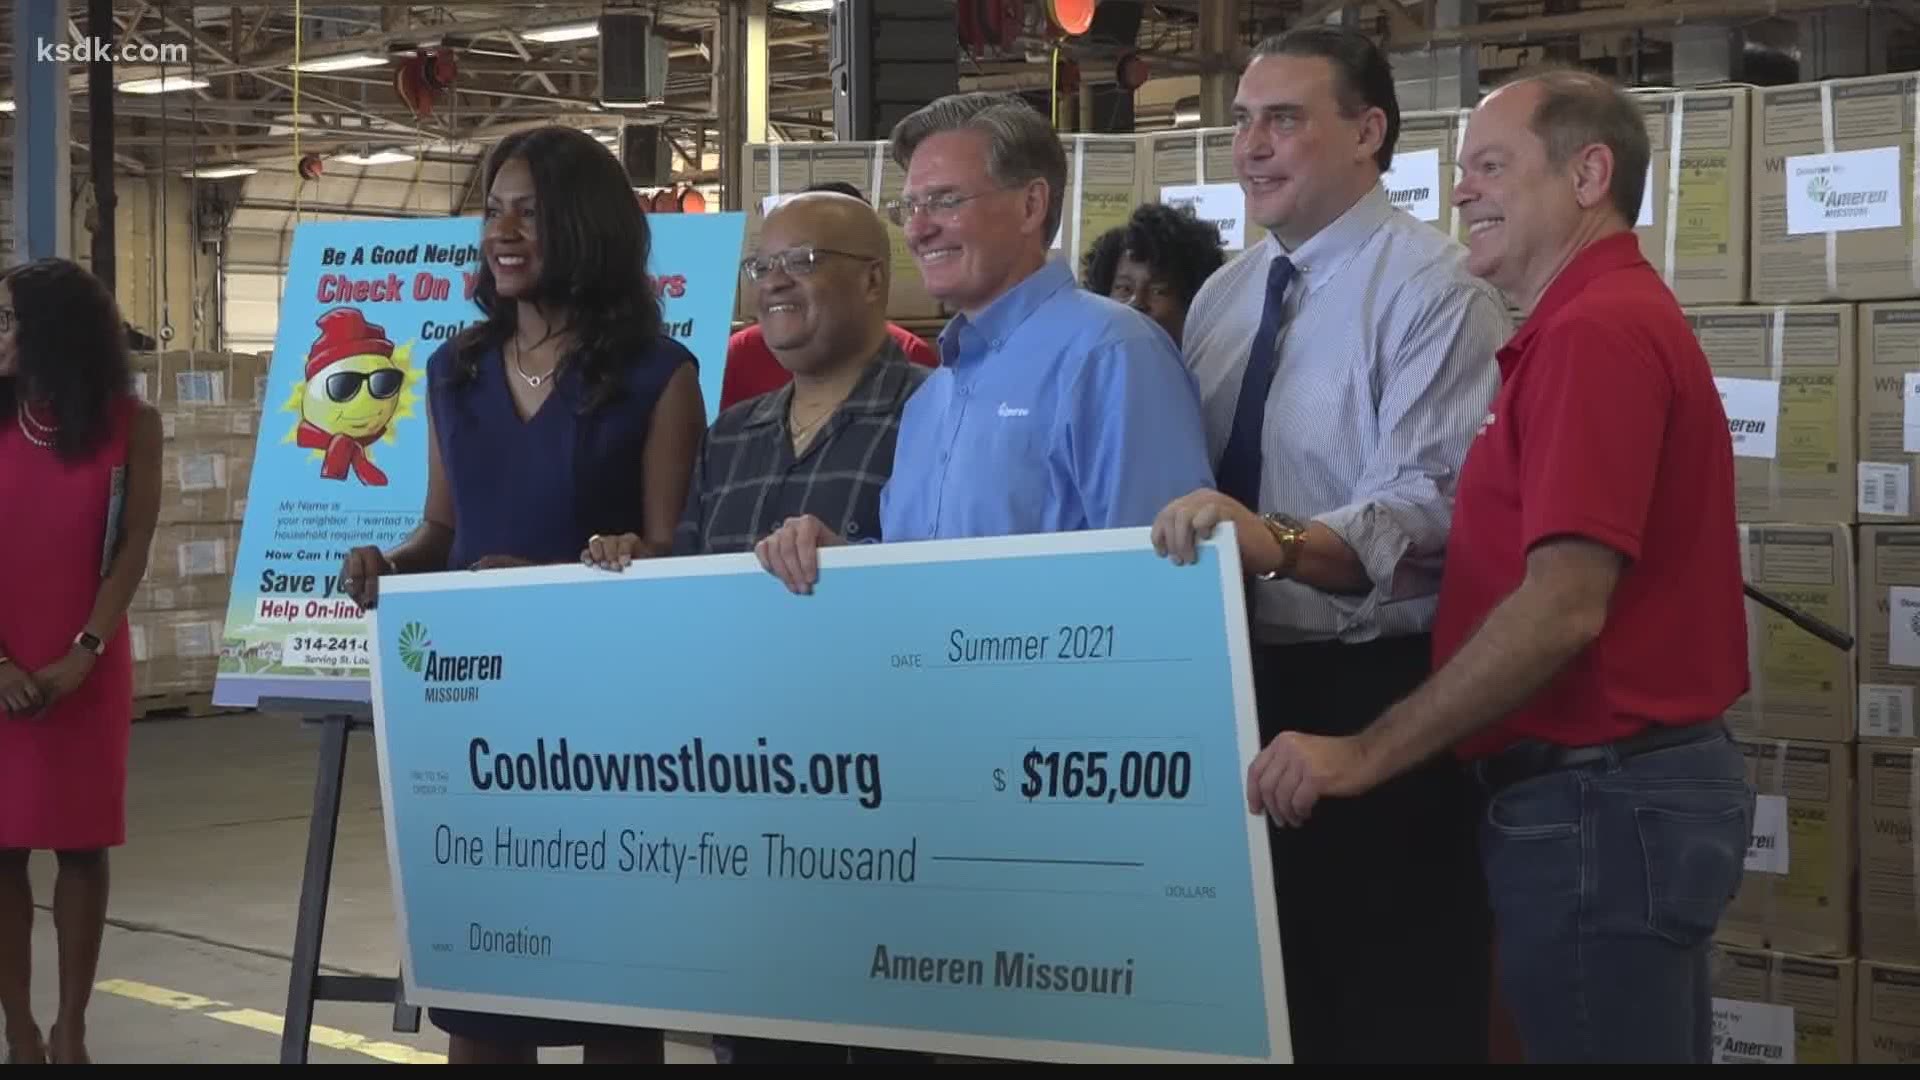 Ameren donated 800 air conditioners, 800 LED light bulbs and $165,000 to keep seniors and people with disabilities cool